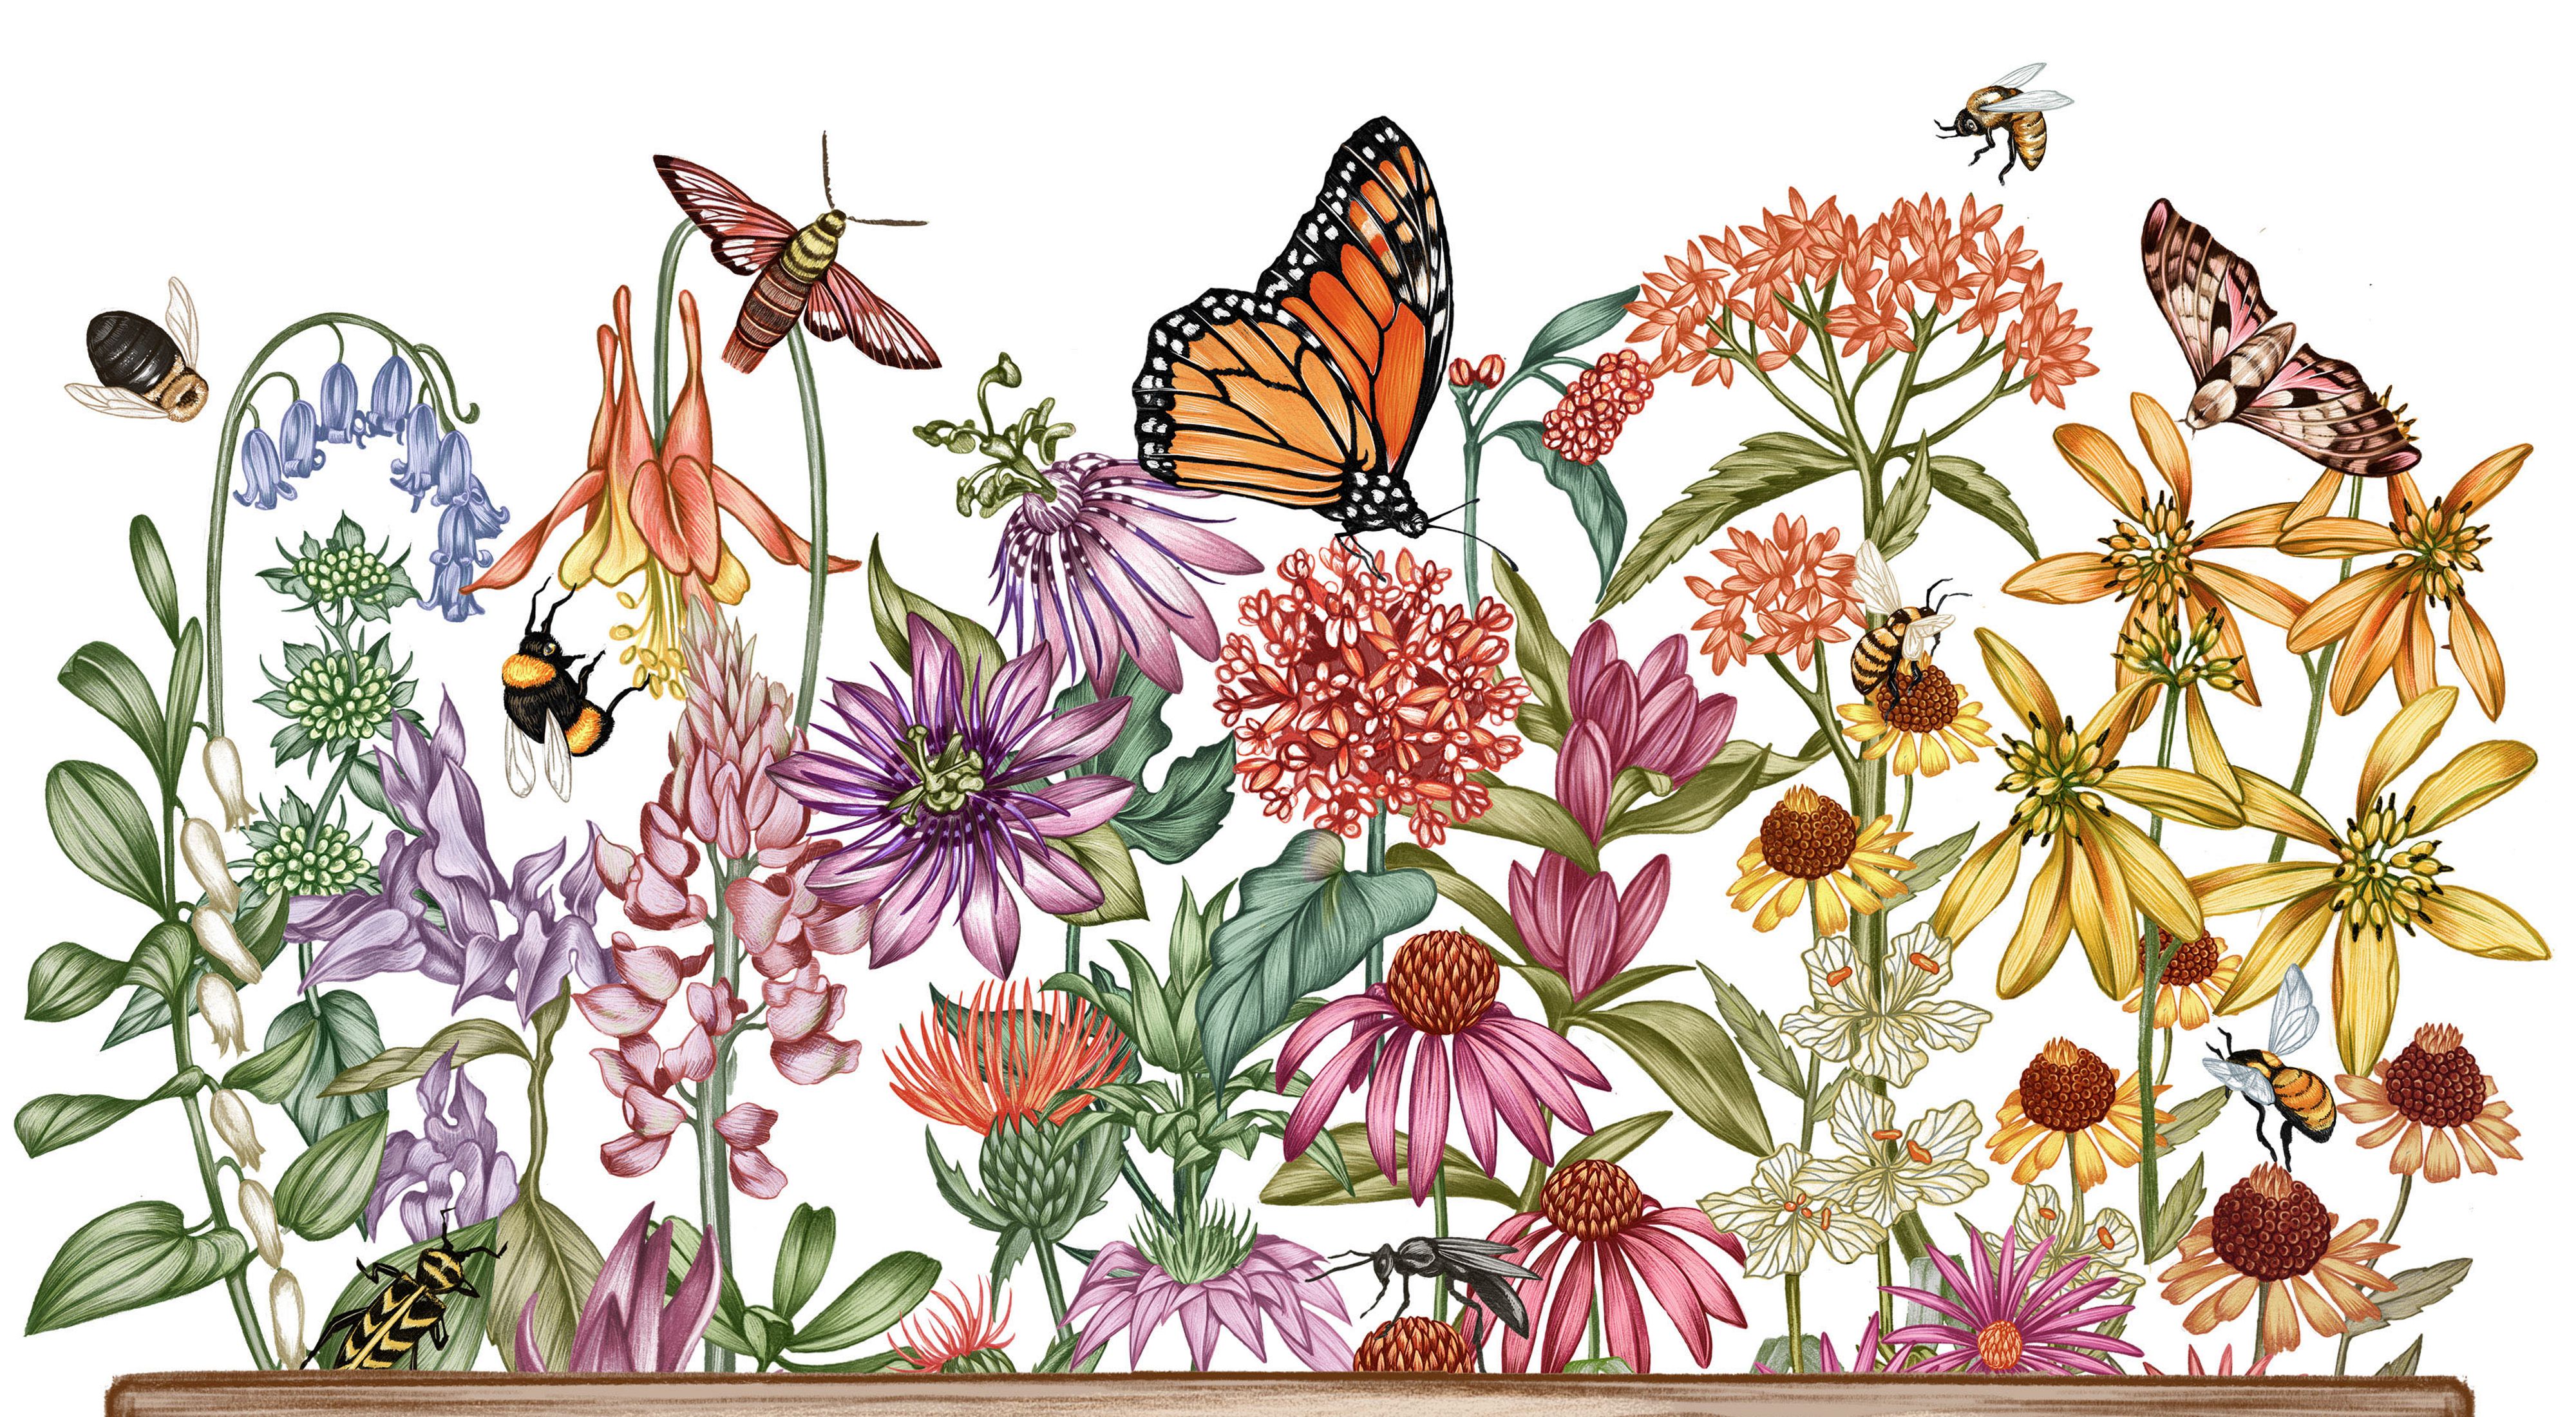 The fates of pollinators and their host plants are intertwined. Taking care of diverse plants gives a diverse set of pollinators a chance to thrive.